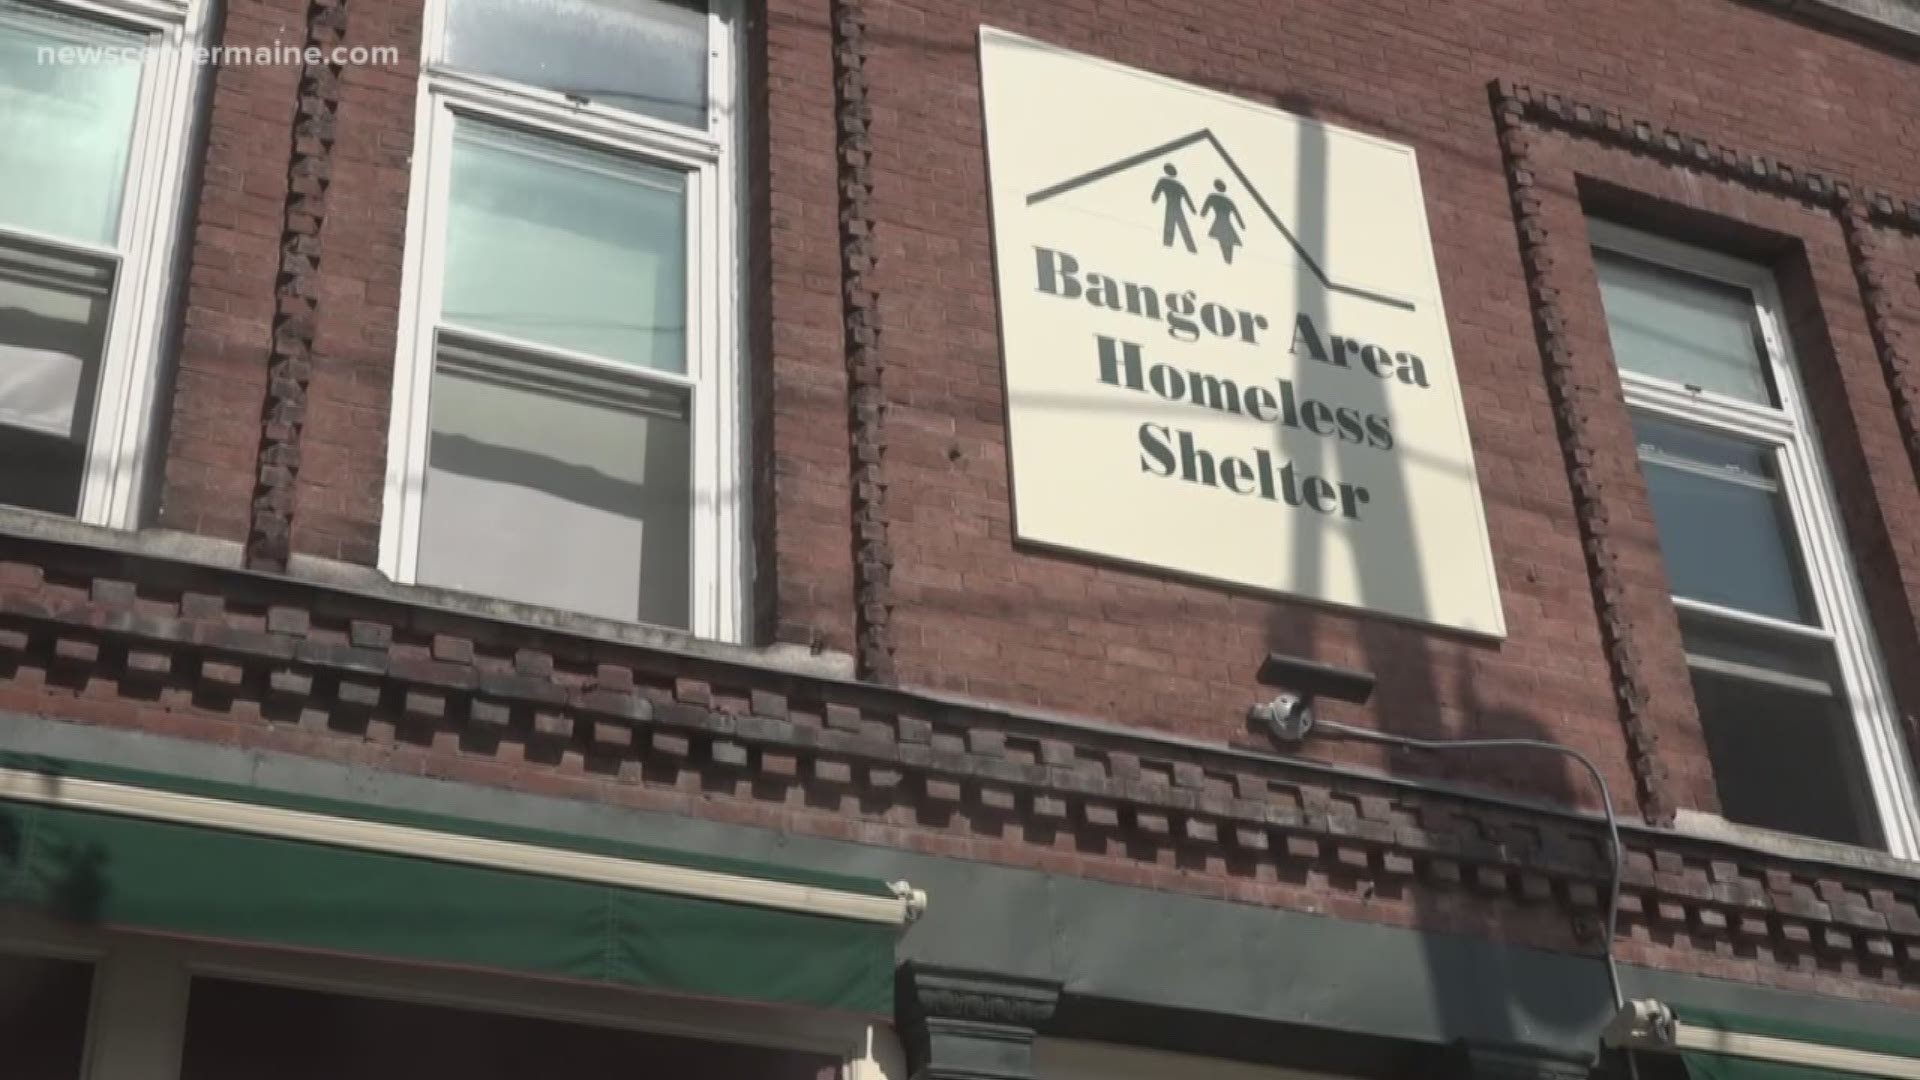 A Penobscot County Homeless Shelter is asking for help to fund their Warming Center.